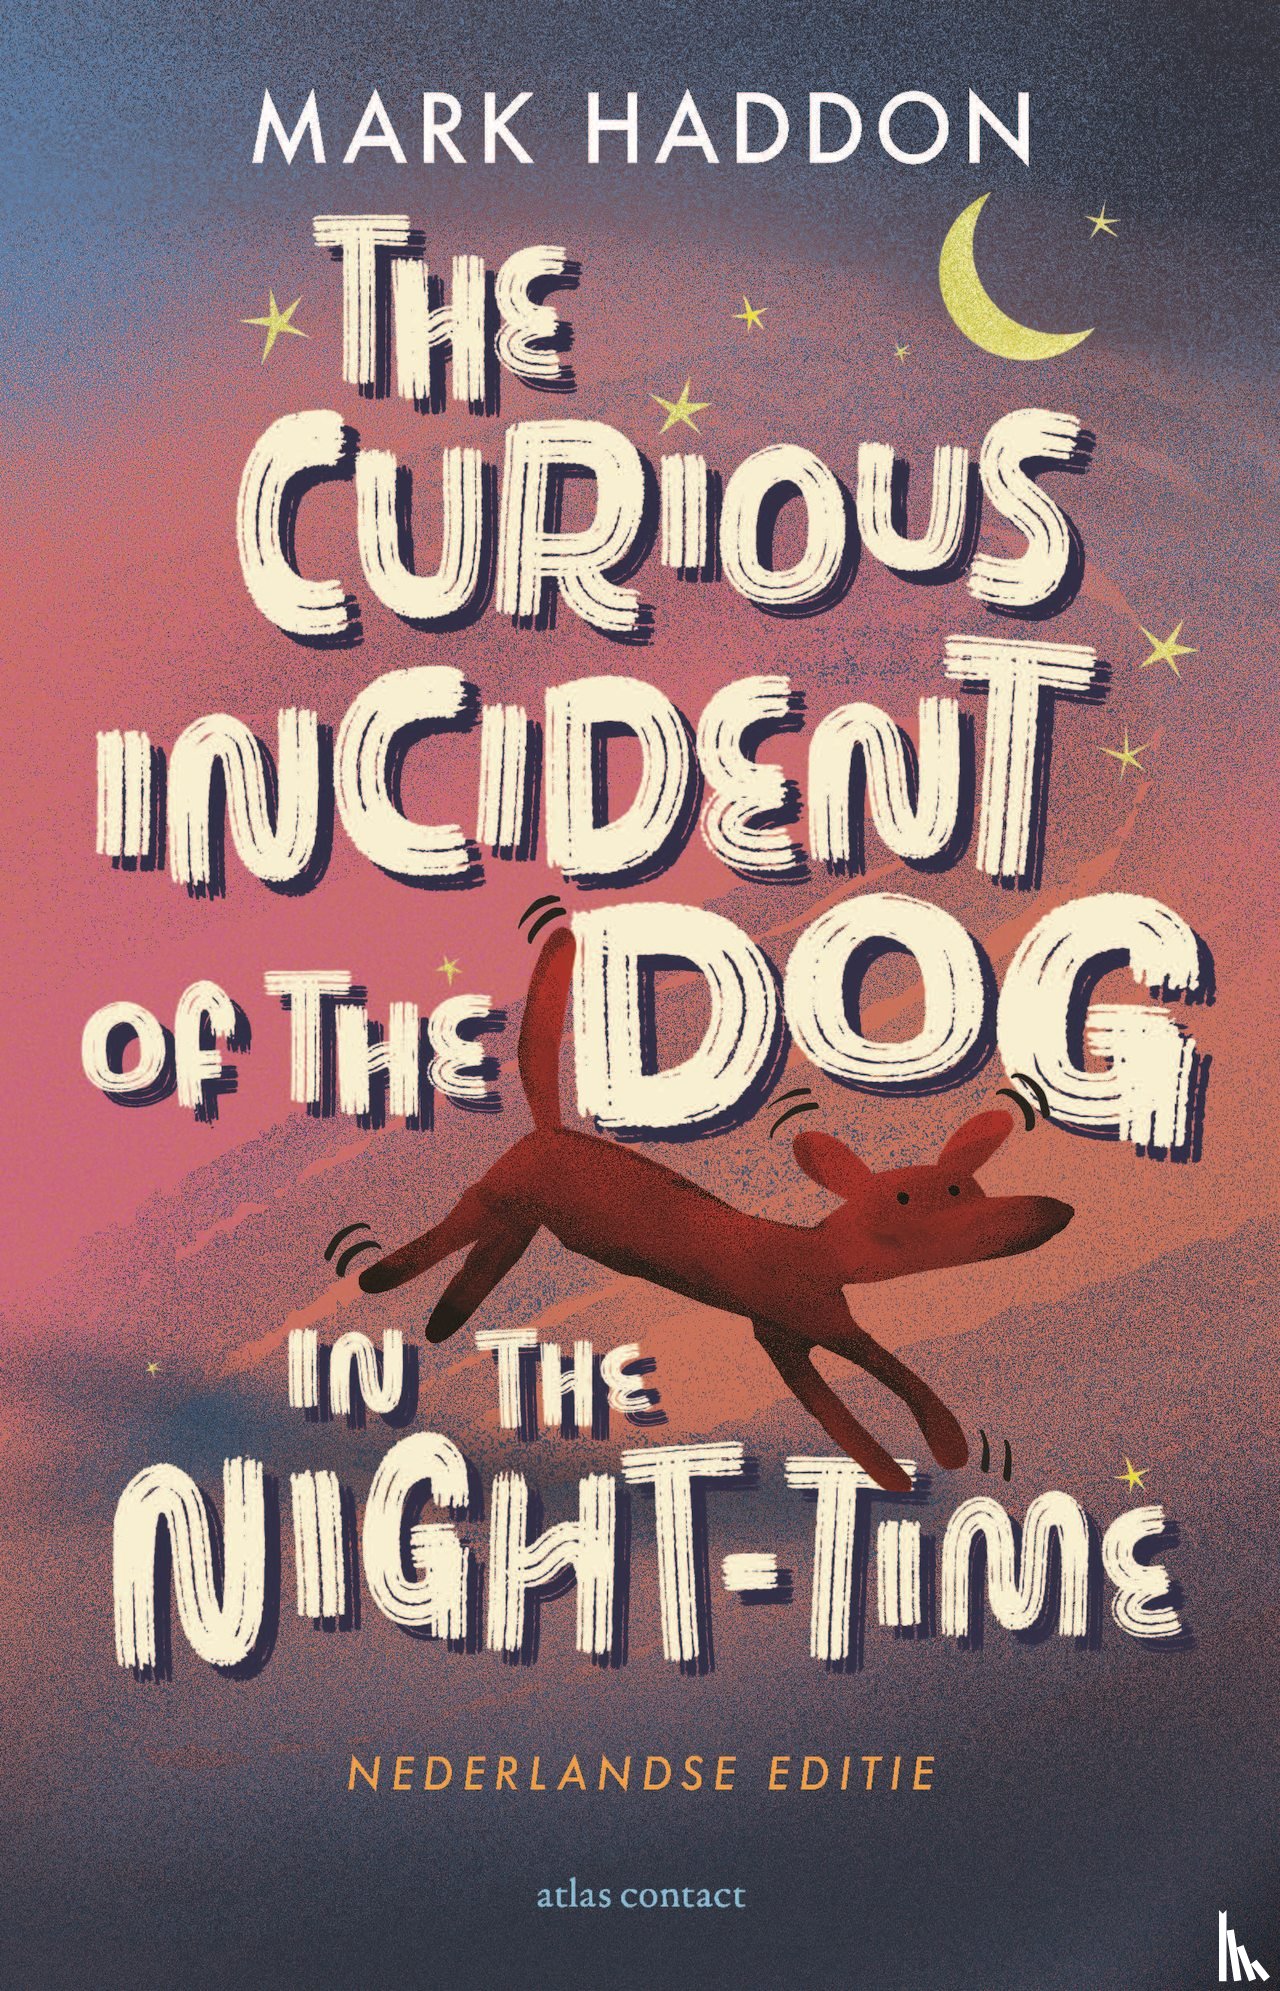 Haddon, Mark - The curious incident of the dog in the night-time (NL editie)